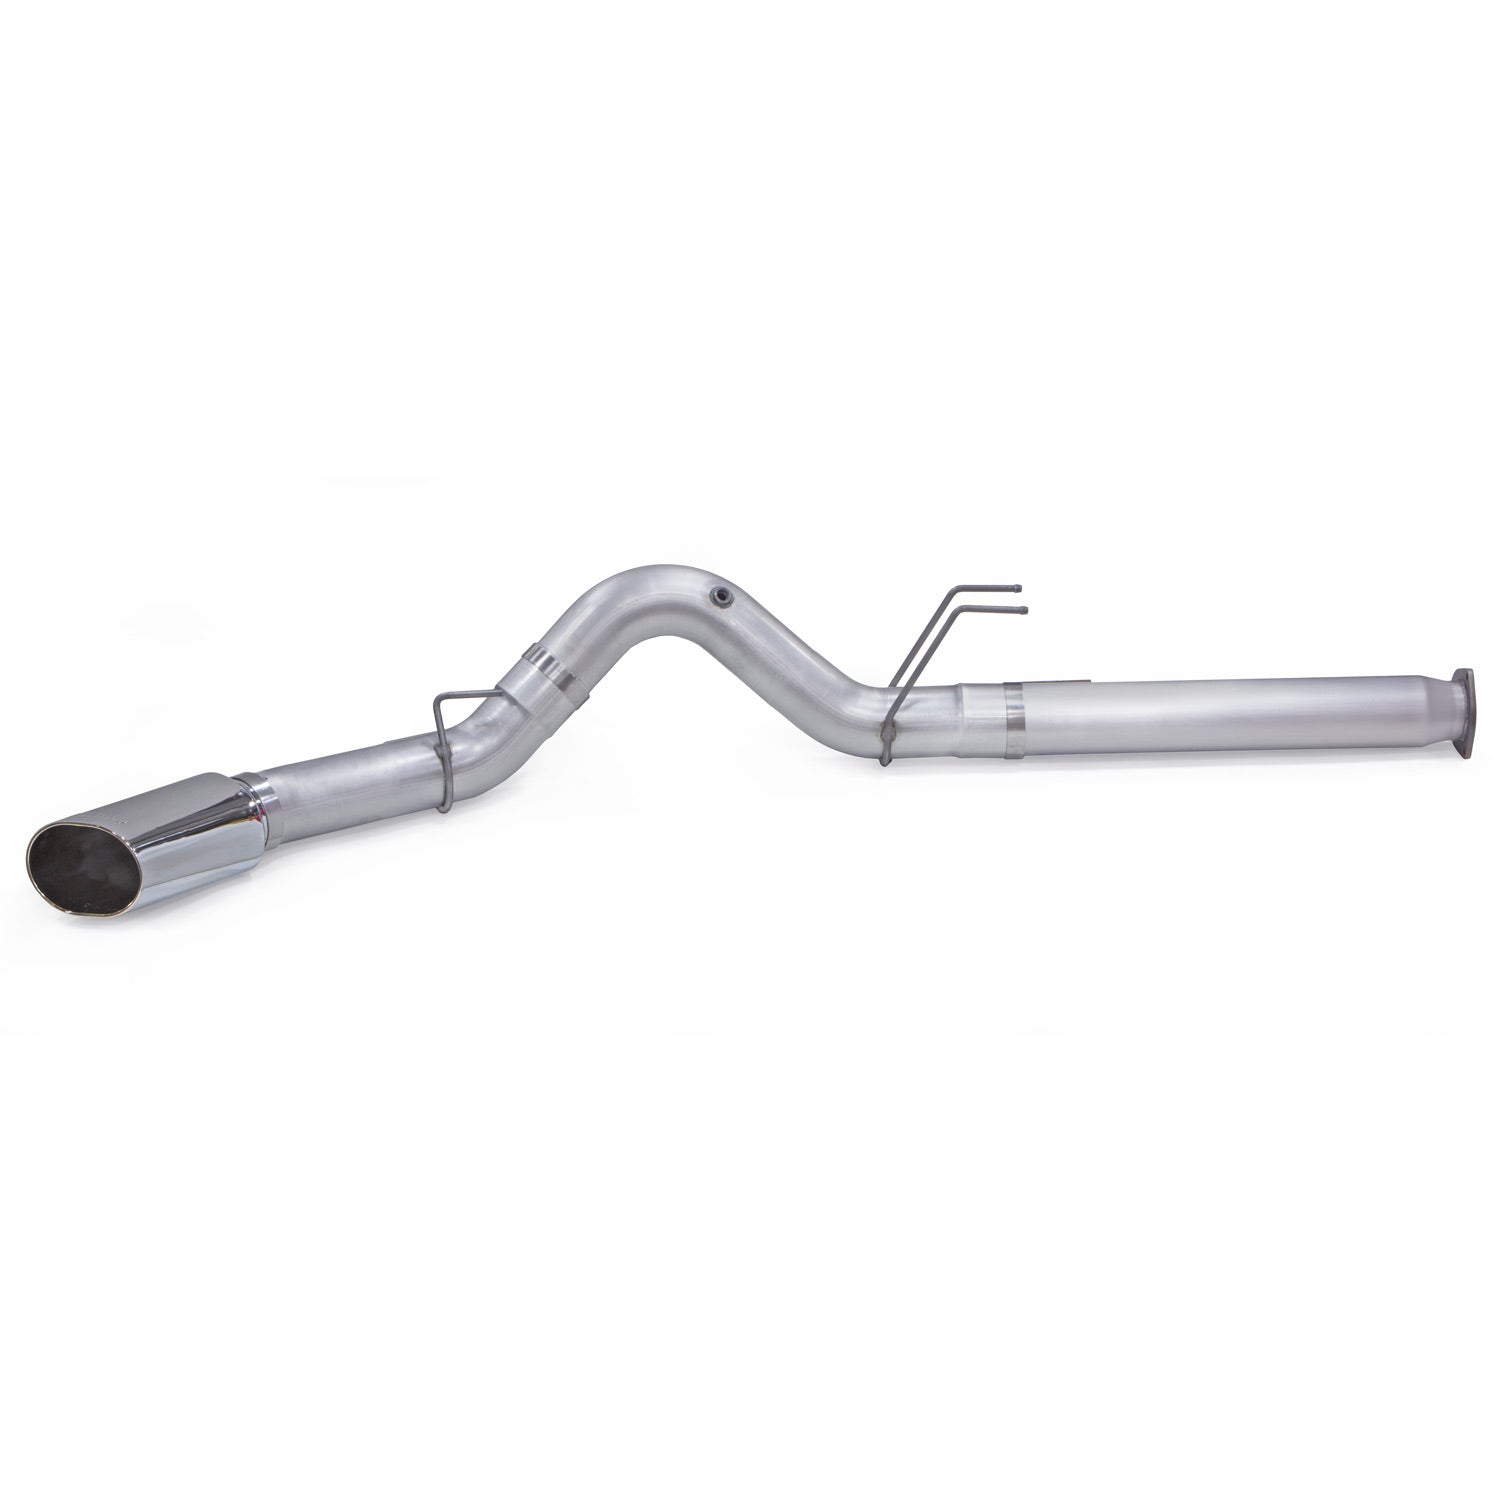 5 in Monster Exhaust for 2007-2022 Ford Super Duty 6.7L